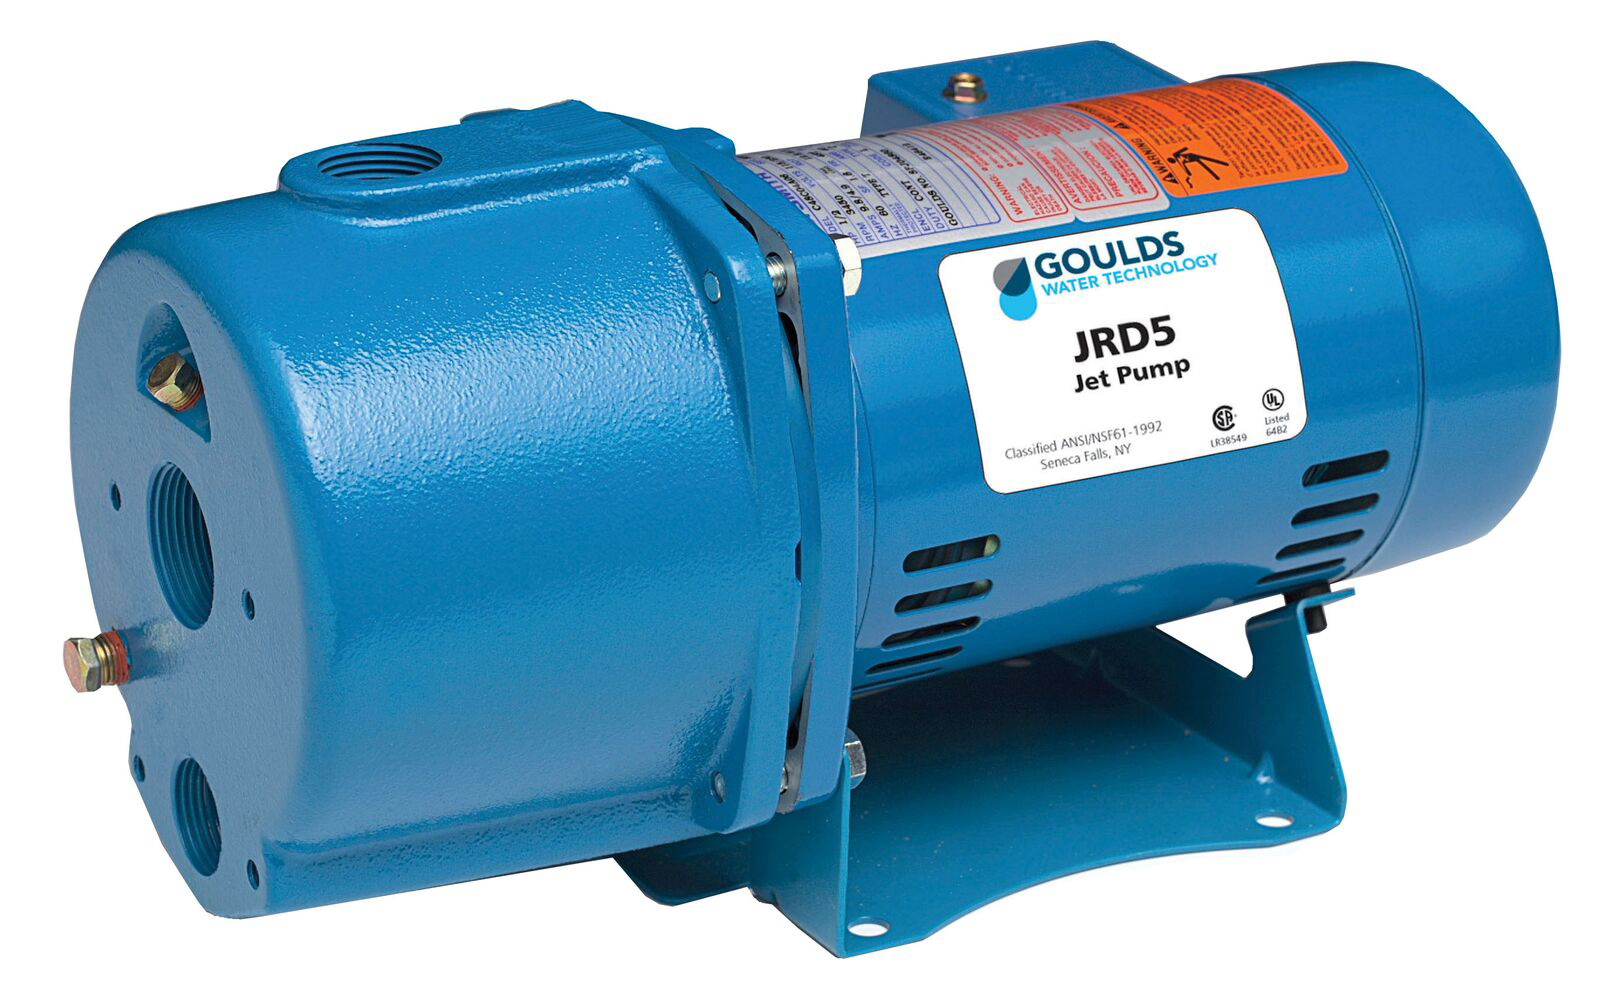 Goulds JRD7 3/4HP Convertible Water Well Jet Pump Single Phase